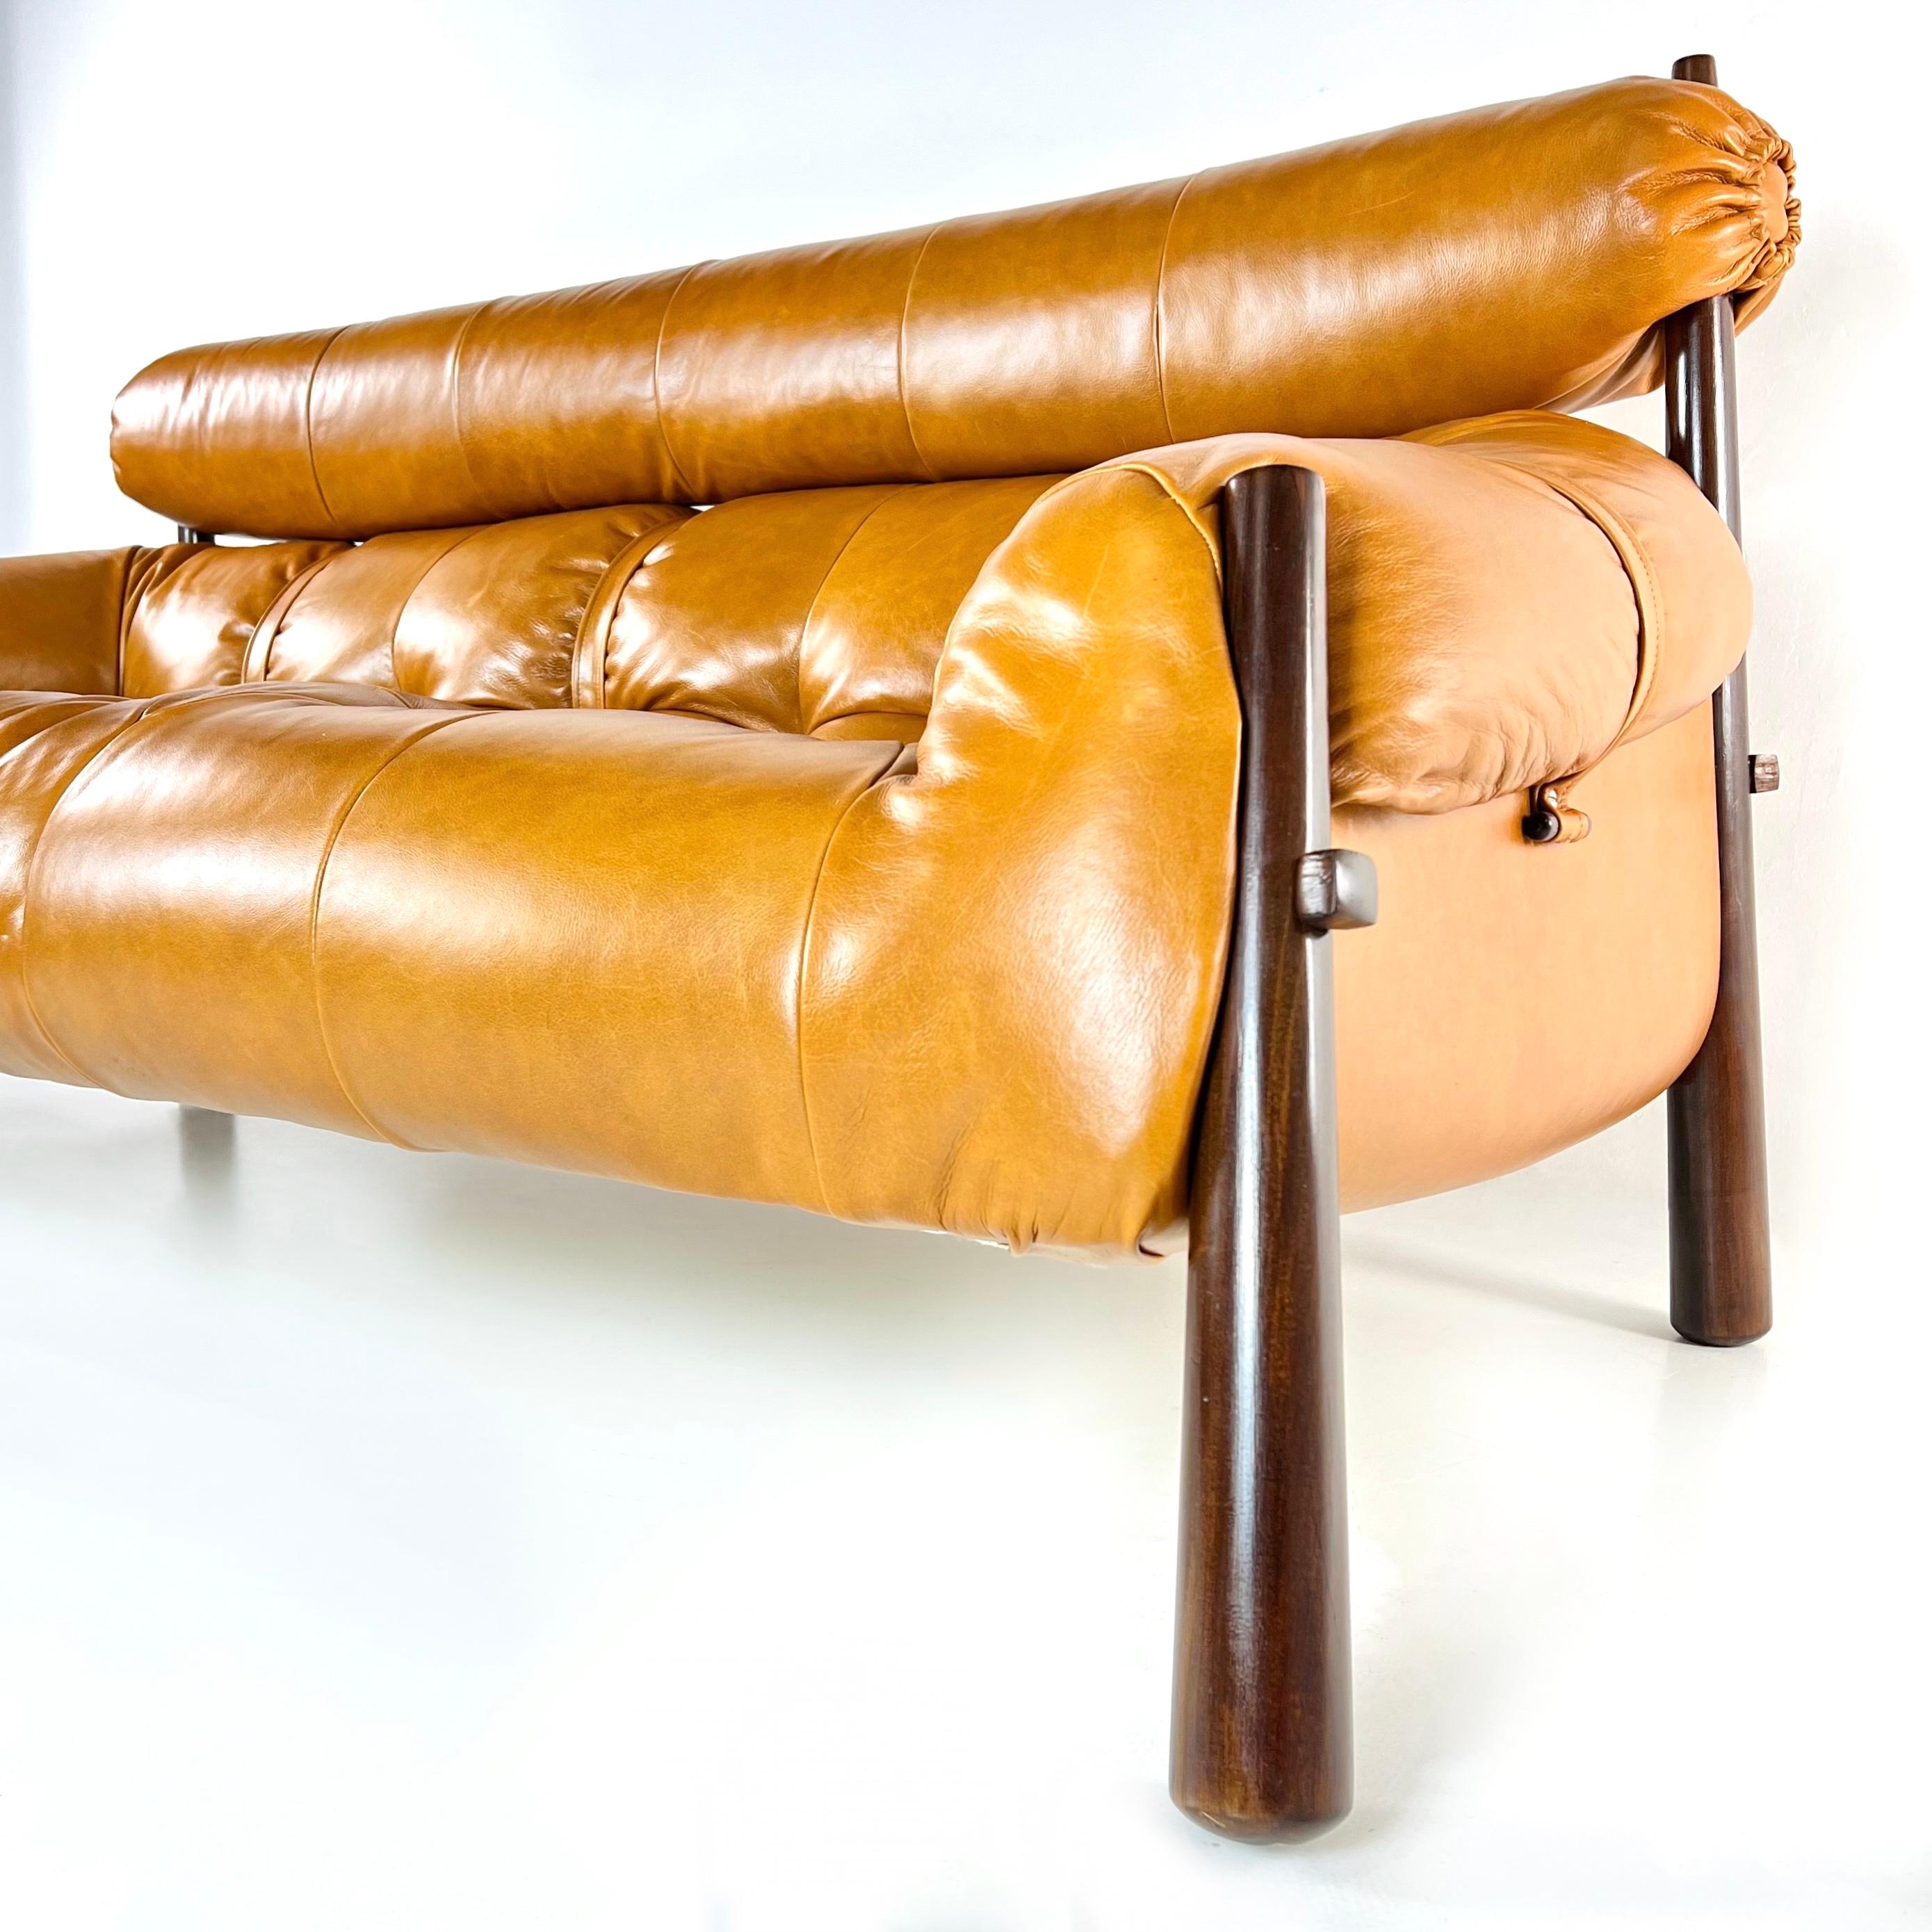 The elegant MP-81 designed by Percival Laser its an iconic sofa from the 70's made from injected foam, Caviúna wood and leather. The headrest makes this piece extremely comfortable and unique. 

The first pieces of furniture designed by Percival